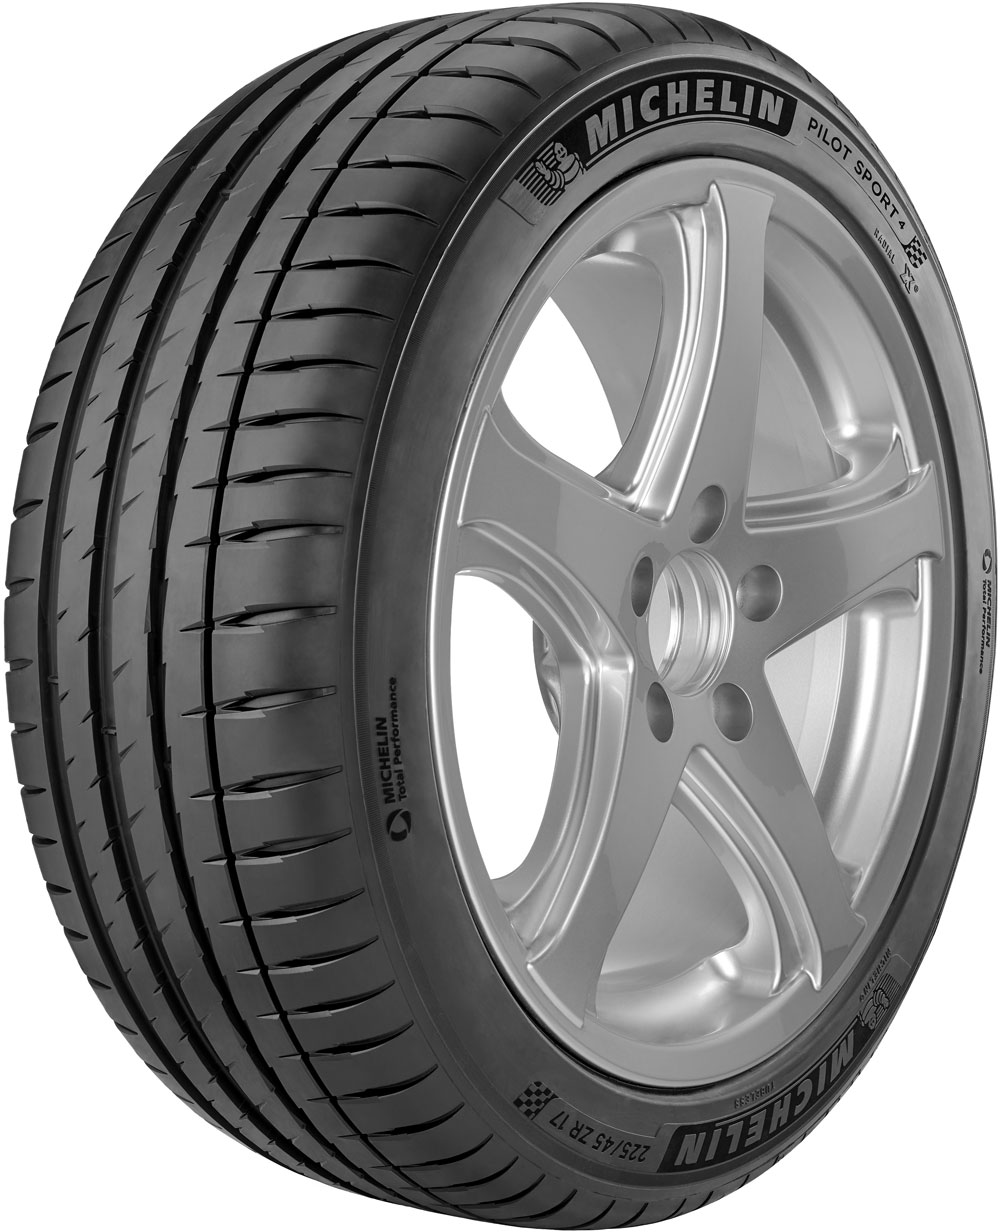 Anvelope auto MICHELIN PS4DT1XL XL 245/40 R18 97Y